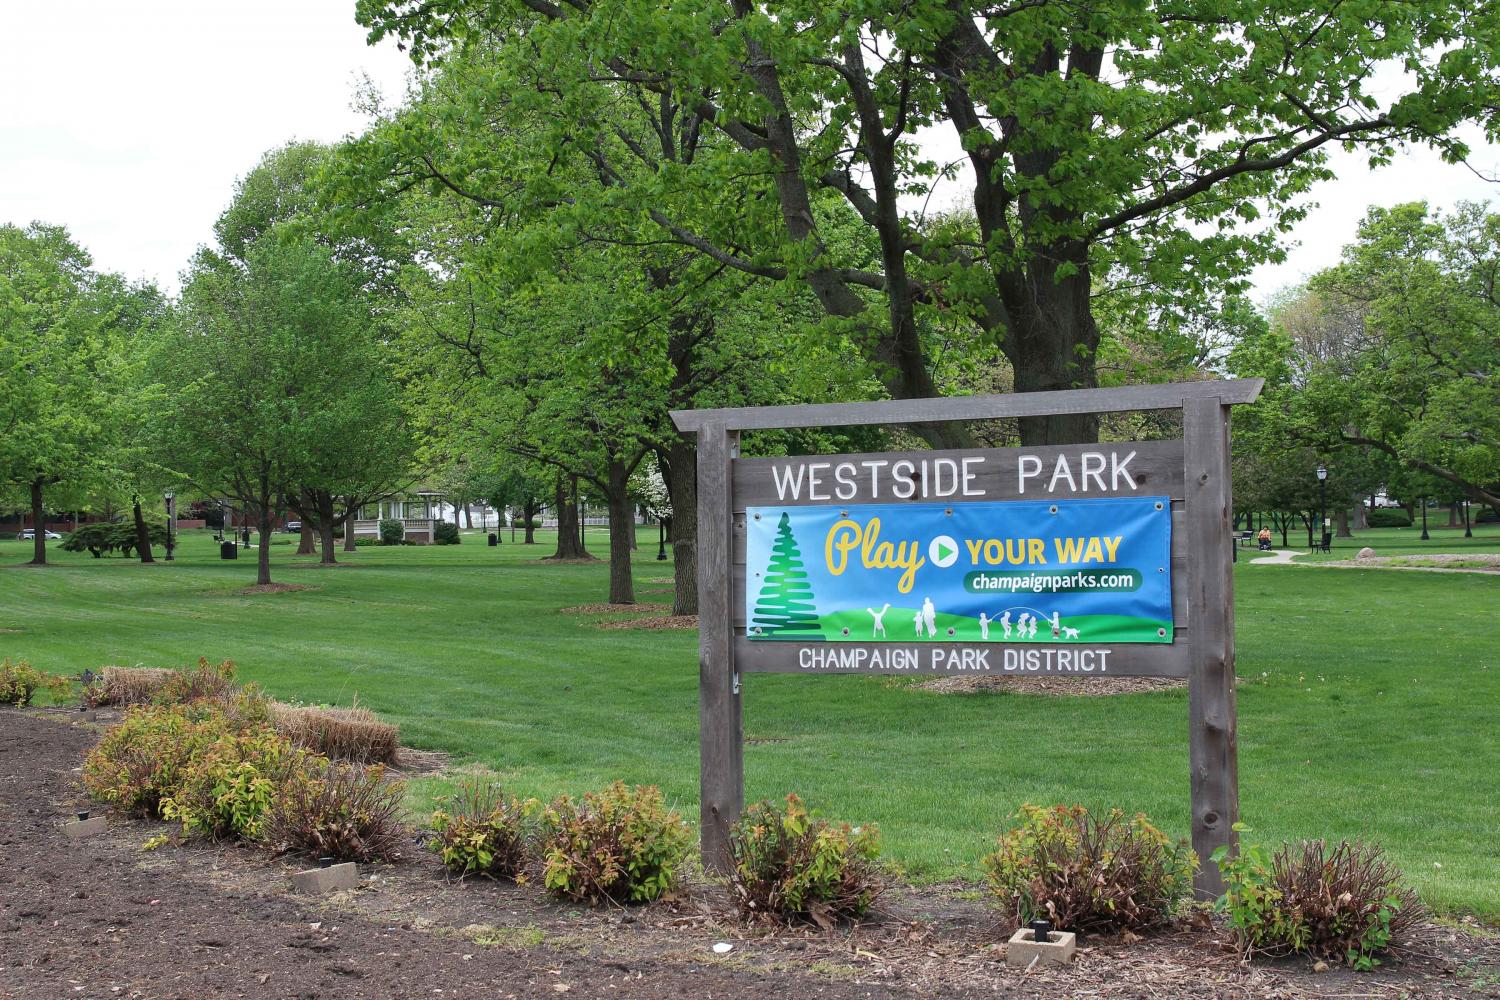 Westside Park is the location of the Peoples Climate Walk, which takes place on Saturday from 2p.m. - 4p.m. The walk aims to promote environmental change in the community. 